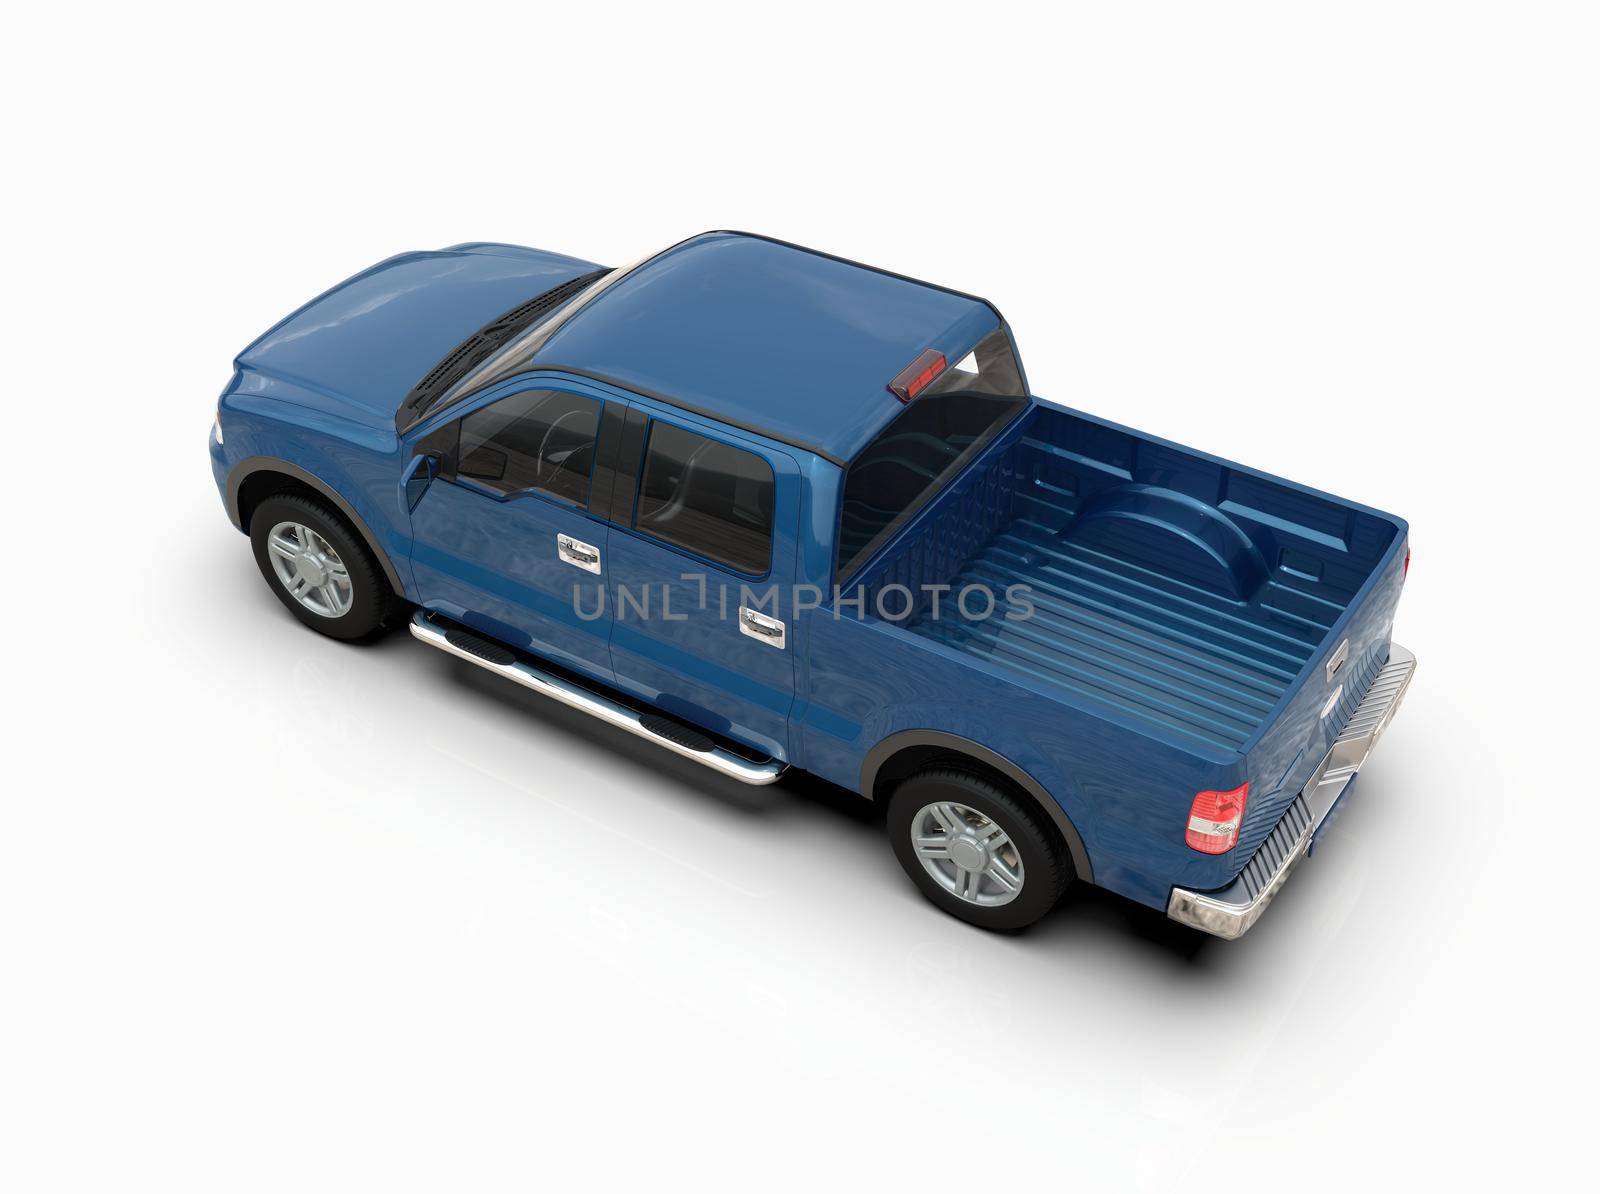 Generic and Brandless Pickup Truck with Enclosed Cabin Isolated on White 3d Illustration, Contemporary Light-Duty Truck Studio, Utility Vehicle Ute Auto Transport, Pickup Open Cargo Area Vehicle Sign